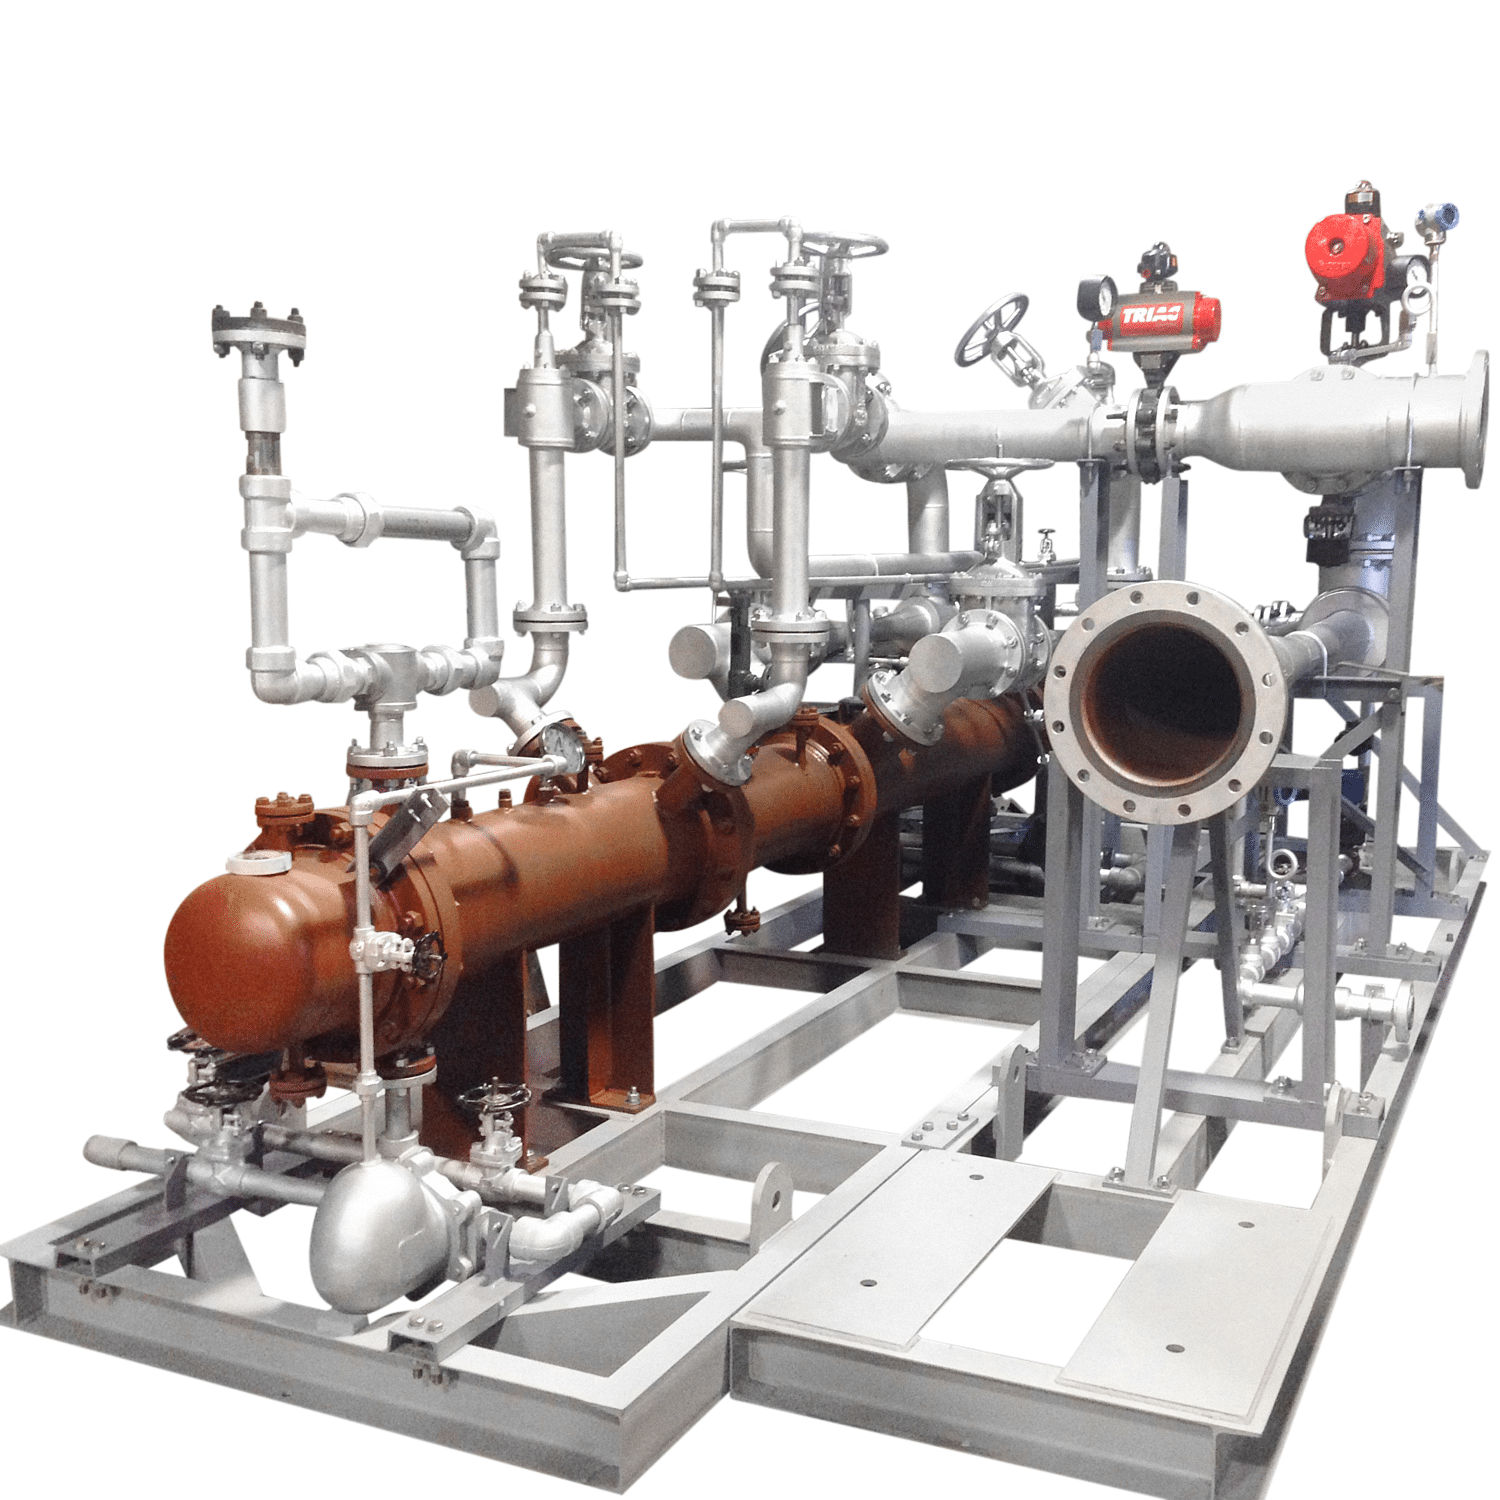 Steam Jet Ejector Vacuum System